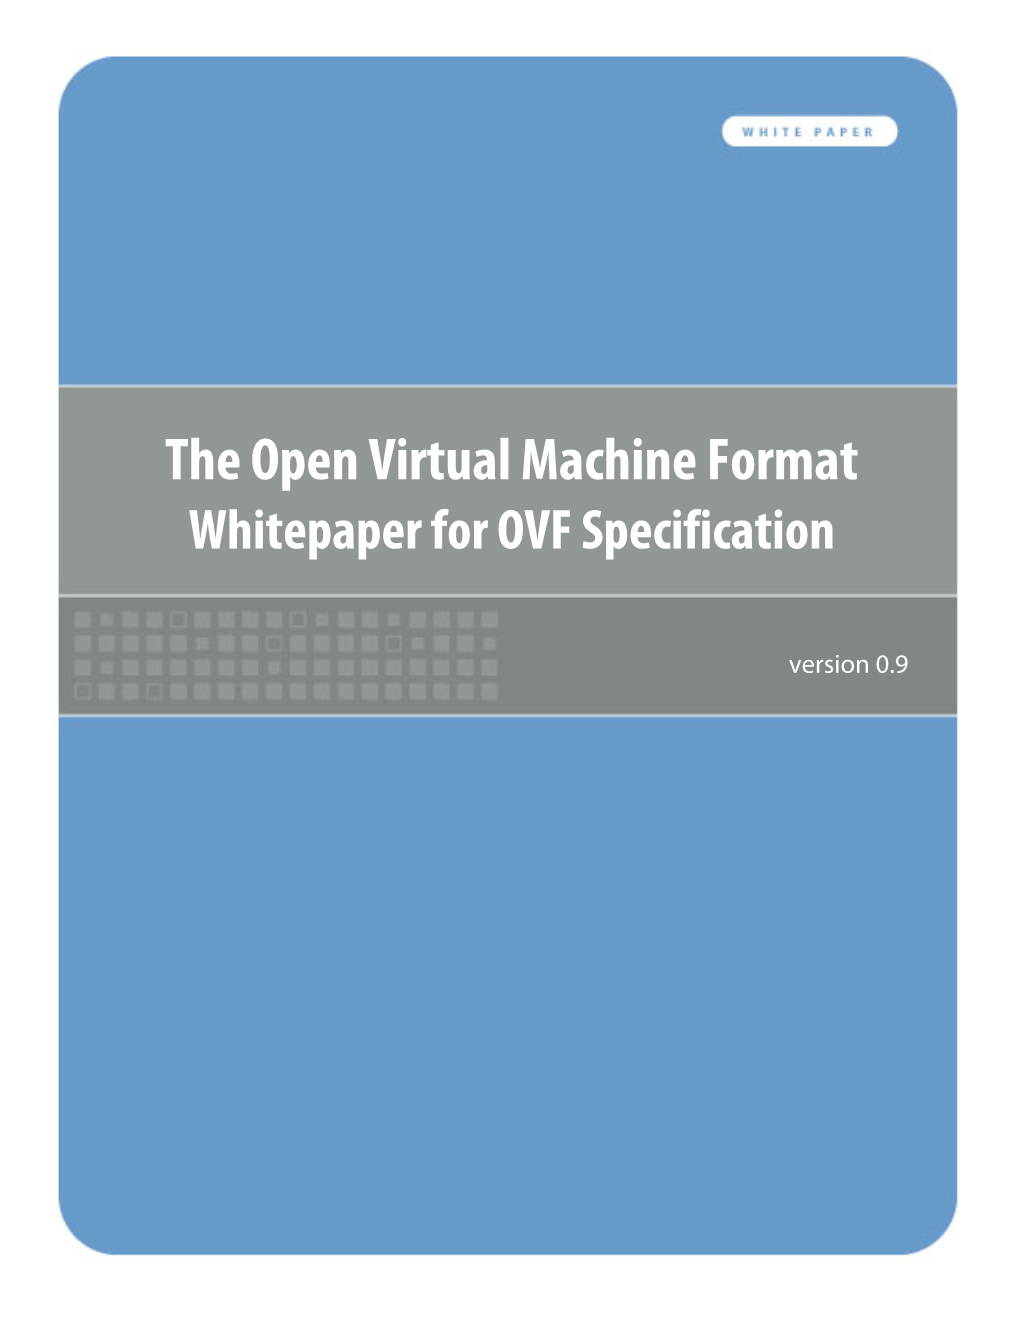 The Open Virtual Machine Format Whitepaper for OVF Specification